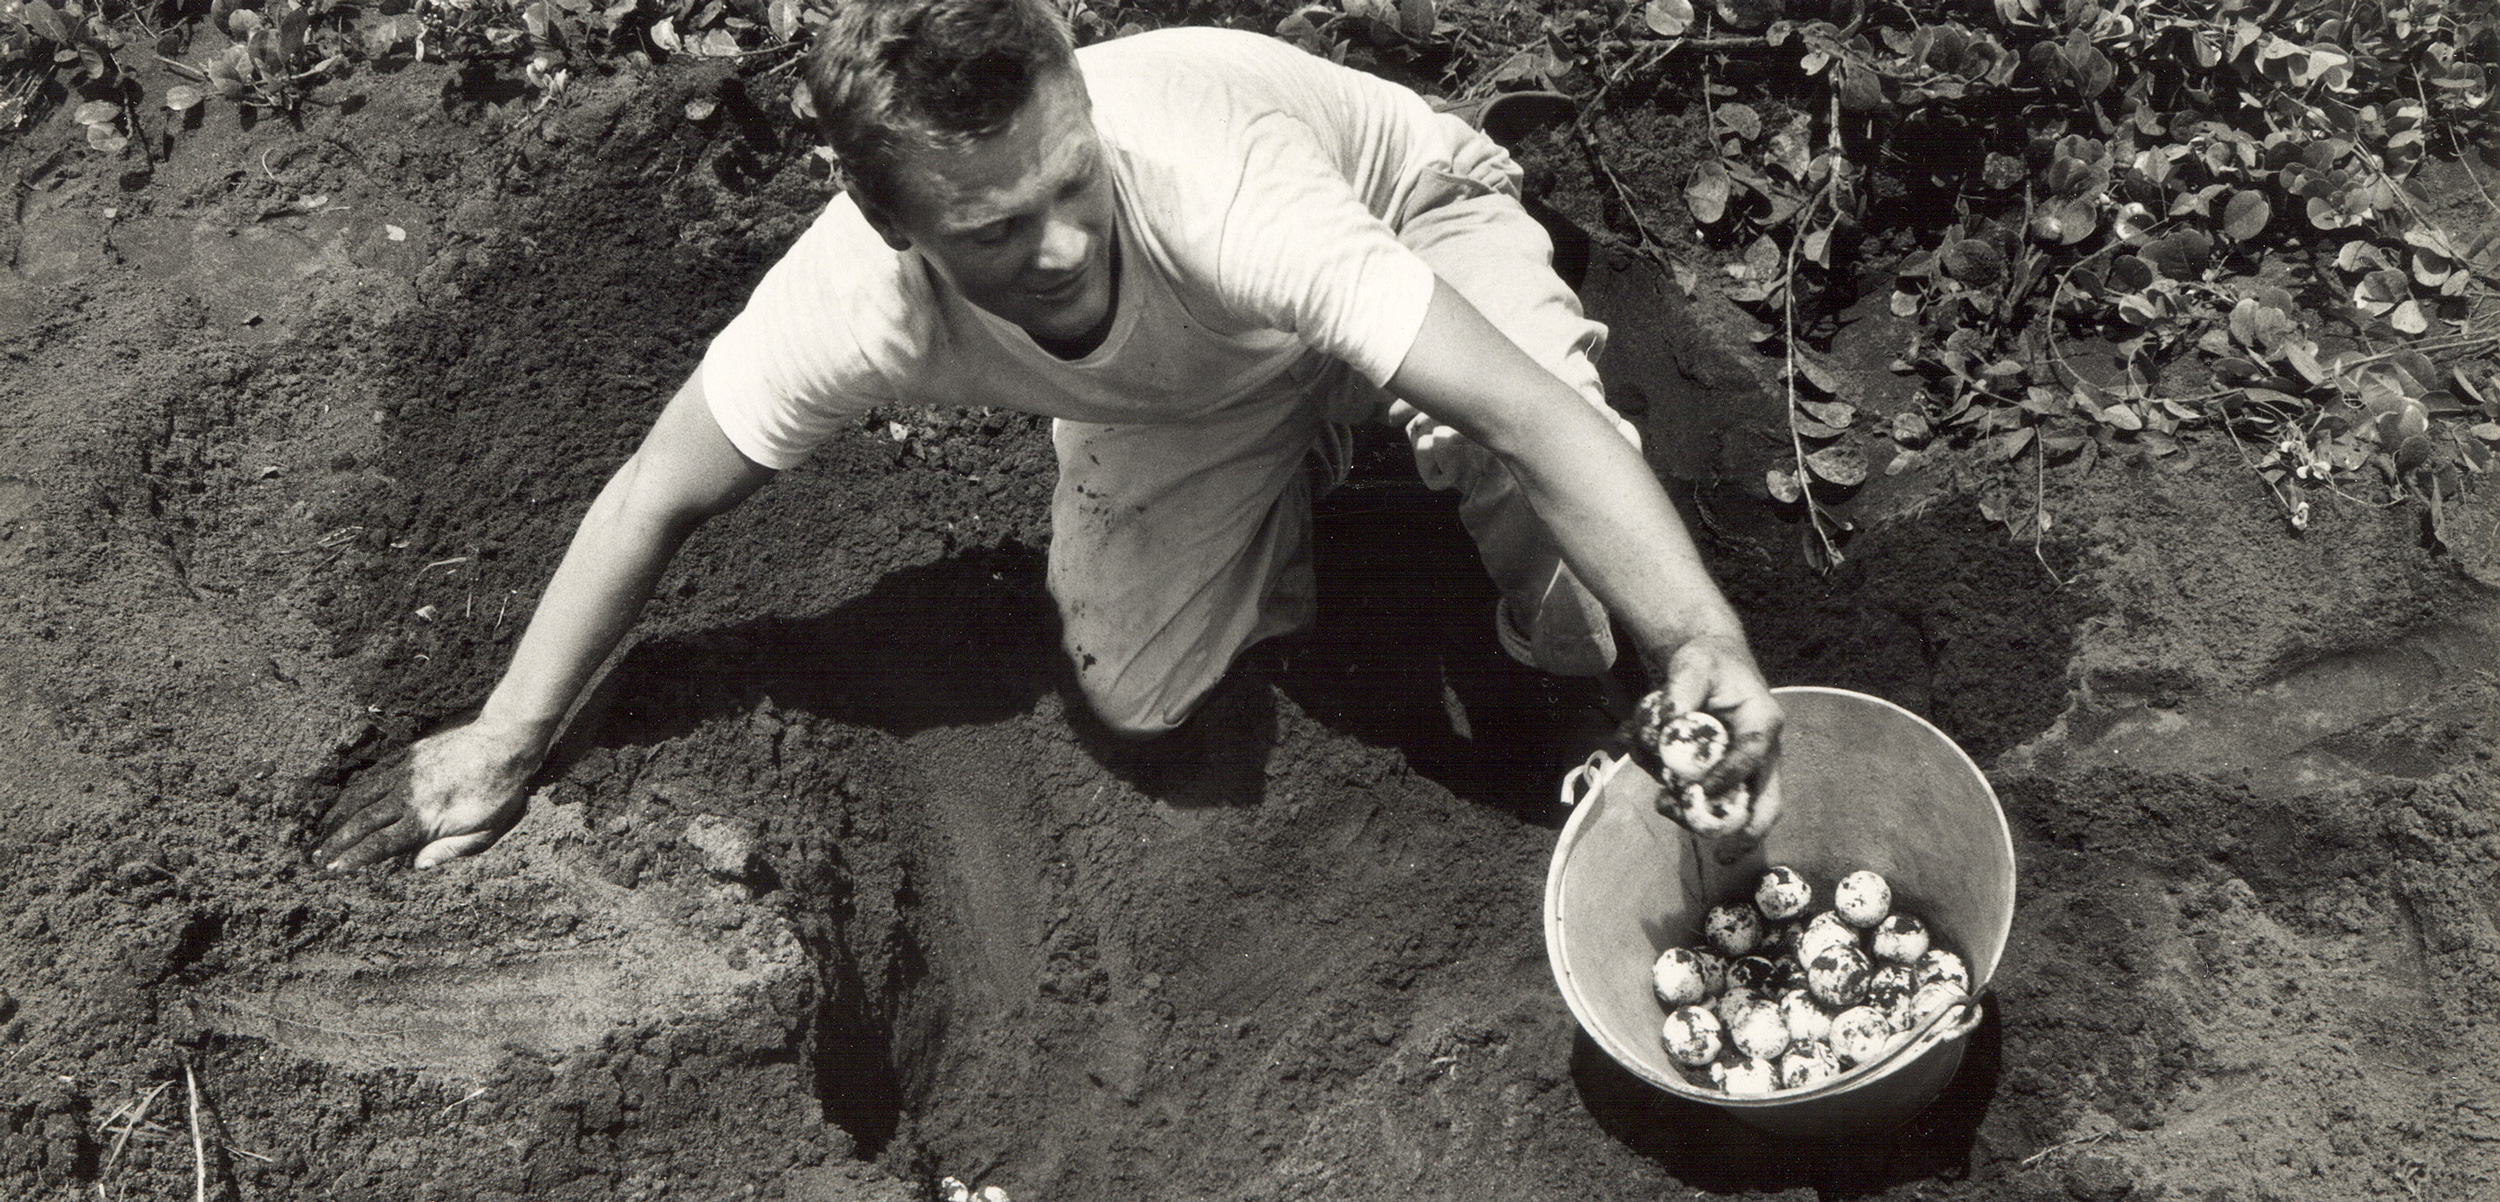 Larry Ogren, a staff member of the Caribbean Conservation Corporation (now known as the Sea Turtle Conservancy), collects eggs from a green turtle nest in Tortuguero, Costa Rica, in 1964 or 1965, as part of Operation Green Turtle. The resulting hatchlings were later relocated to various Caribbean destinations. Photo courtesy of conserveturtles.org